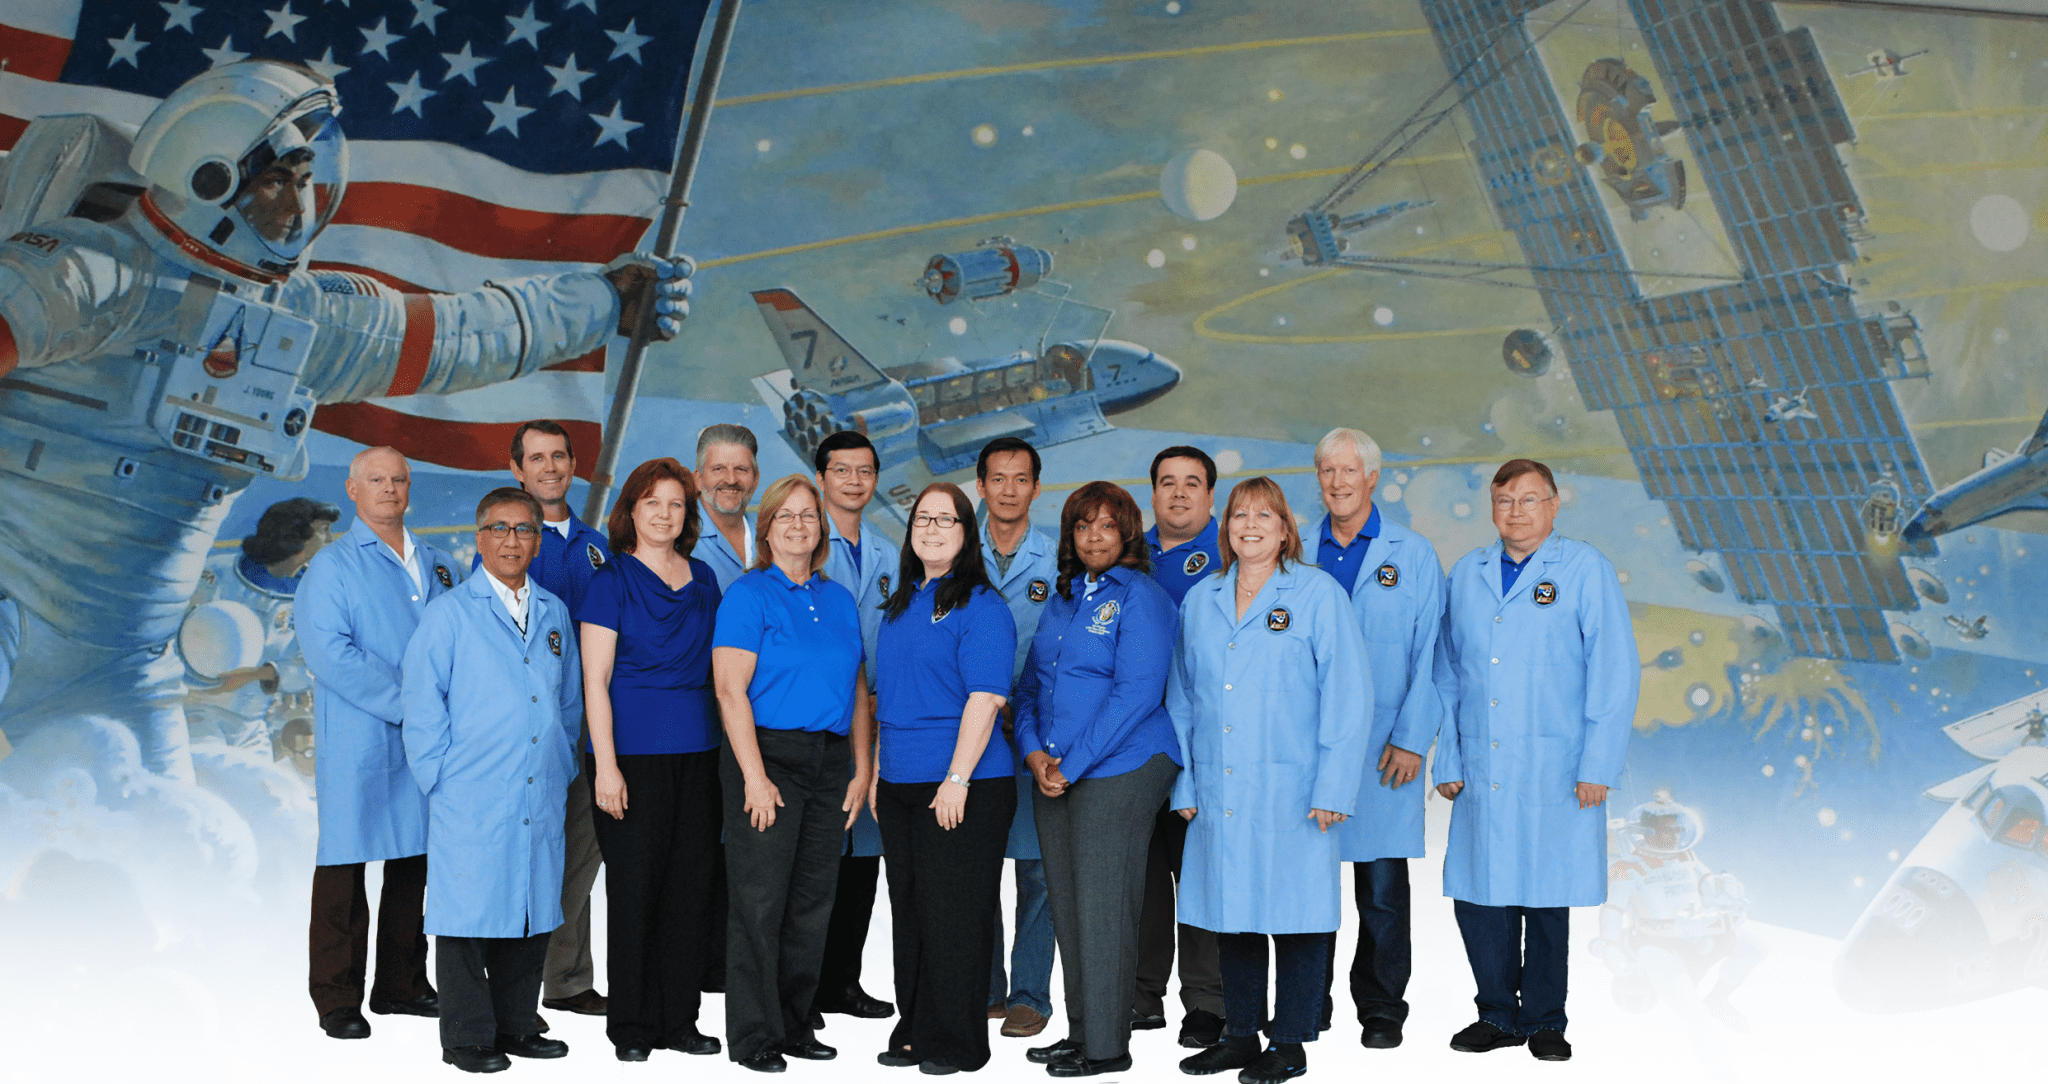 Group picture of the failure analysis laboratory team that deals with failure testing, material testing, electrical testing, and counterfiet testing.